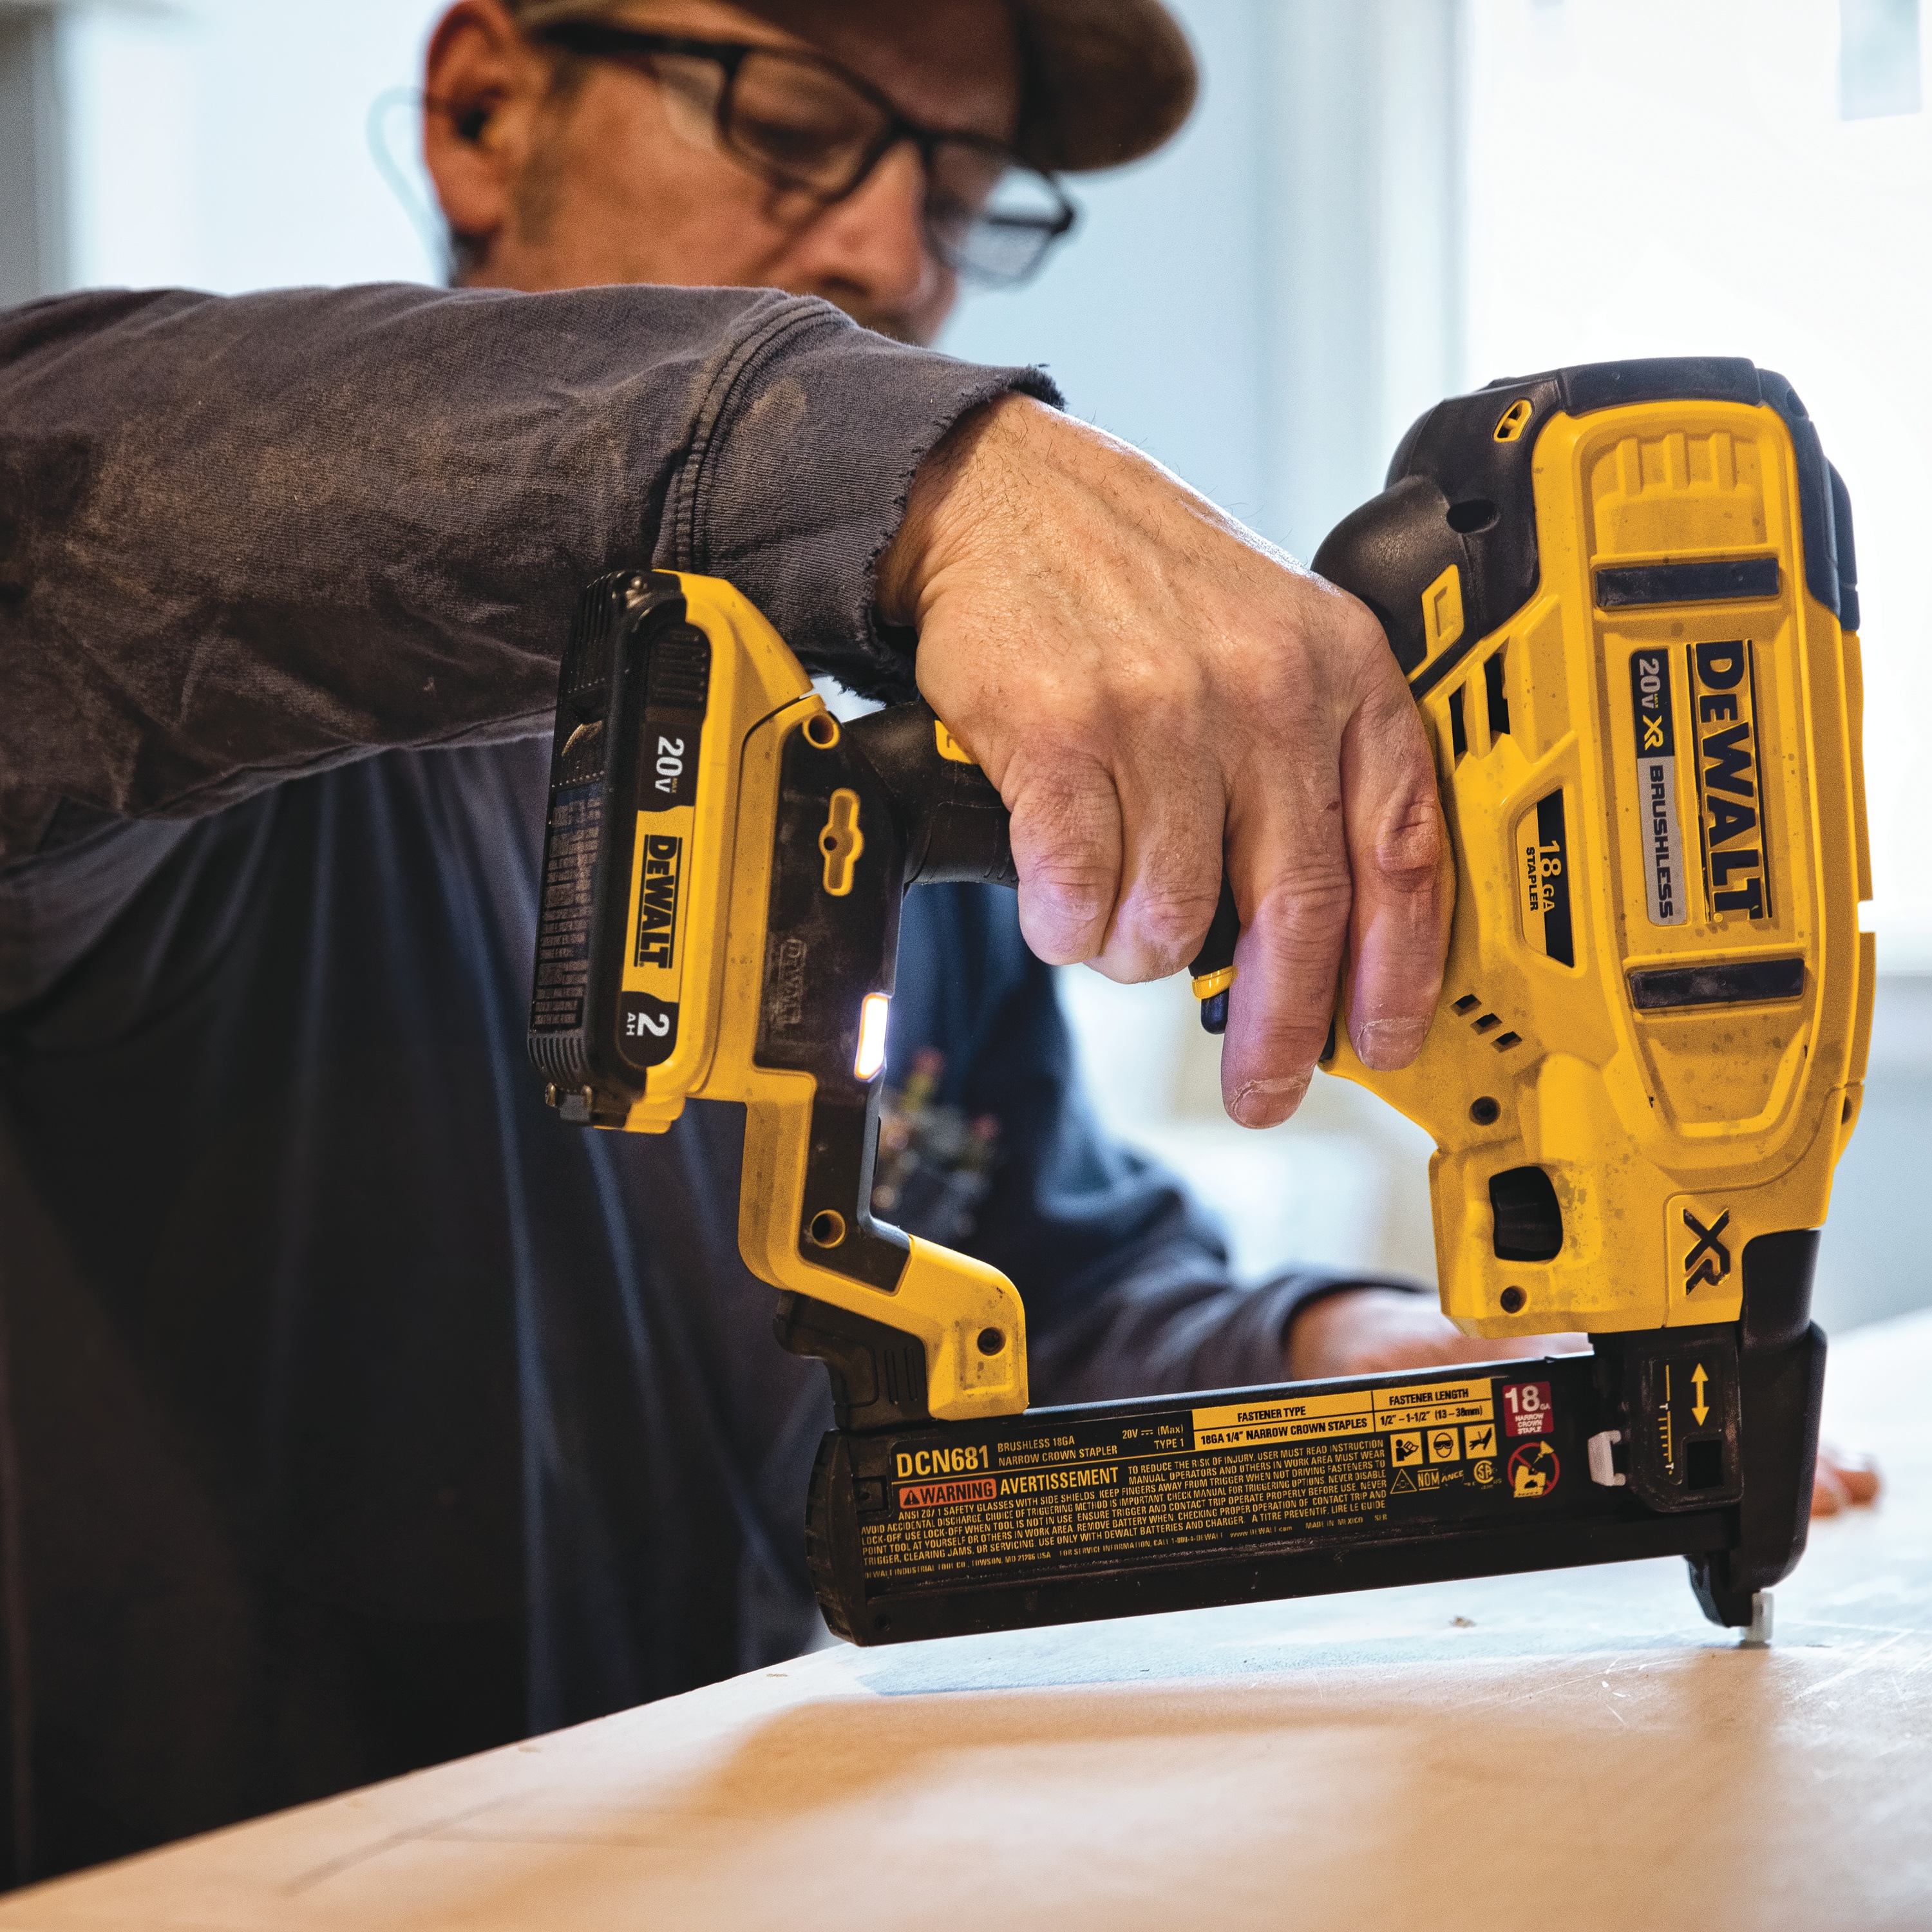 XR 18 gauge Cordless Narrow Crown Stapler in action on wooden board by a construction worker